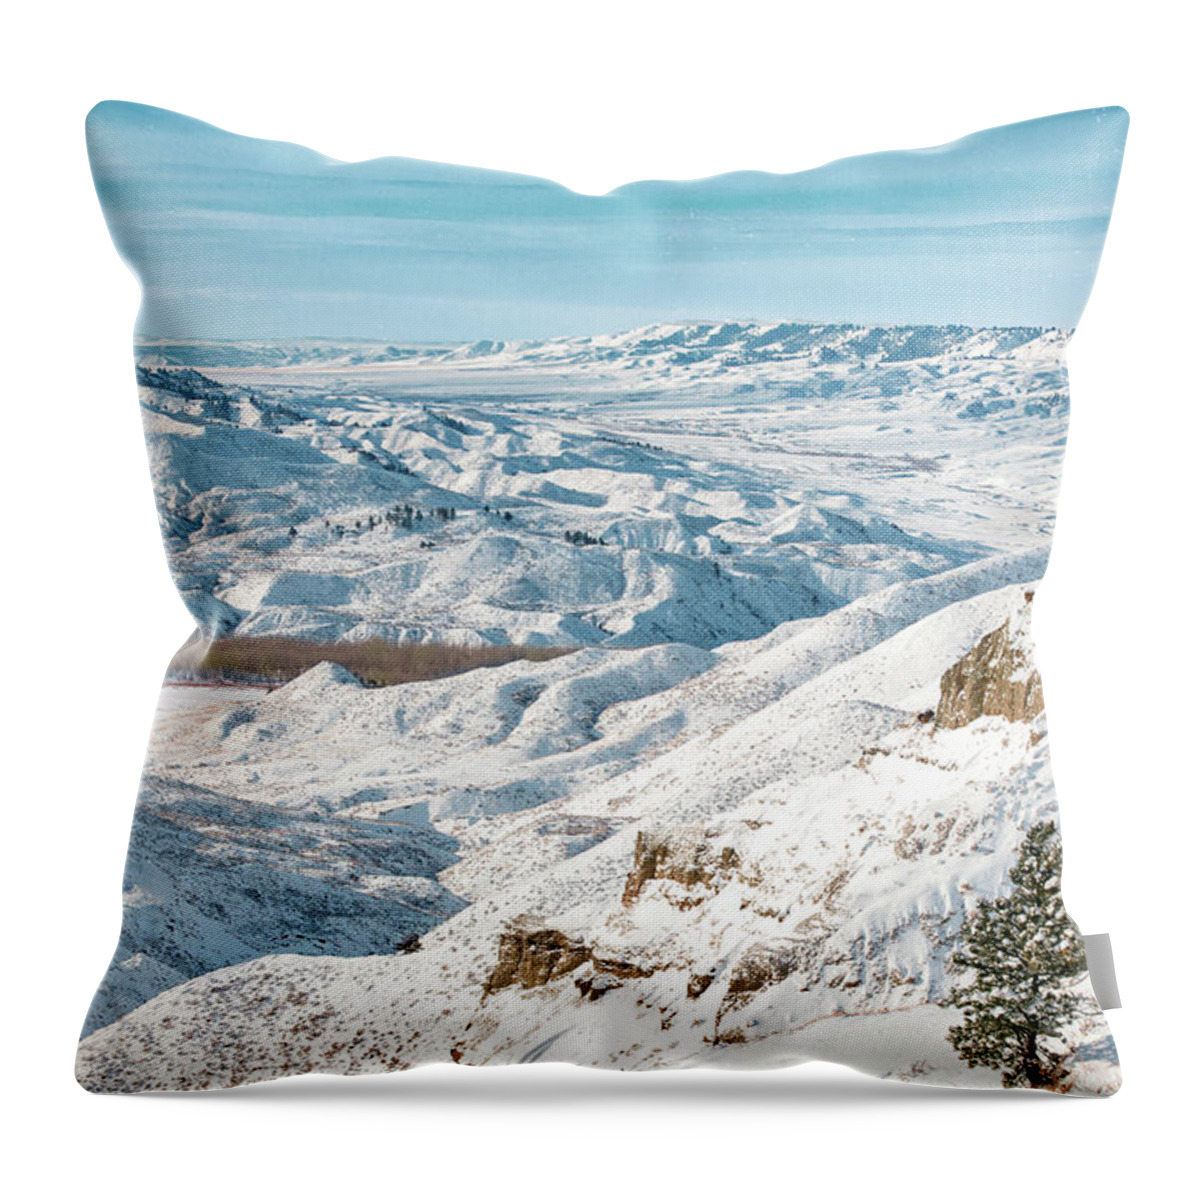 A Winter's View Of The Snowy Landscape In The Judith River Breaks Near Winifred Throw Pillow featuring the photograph Snowy Breaks by Todd Klassy